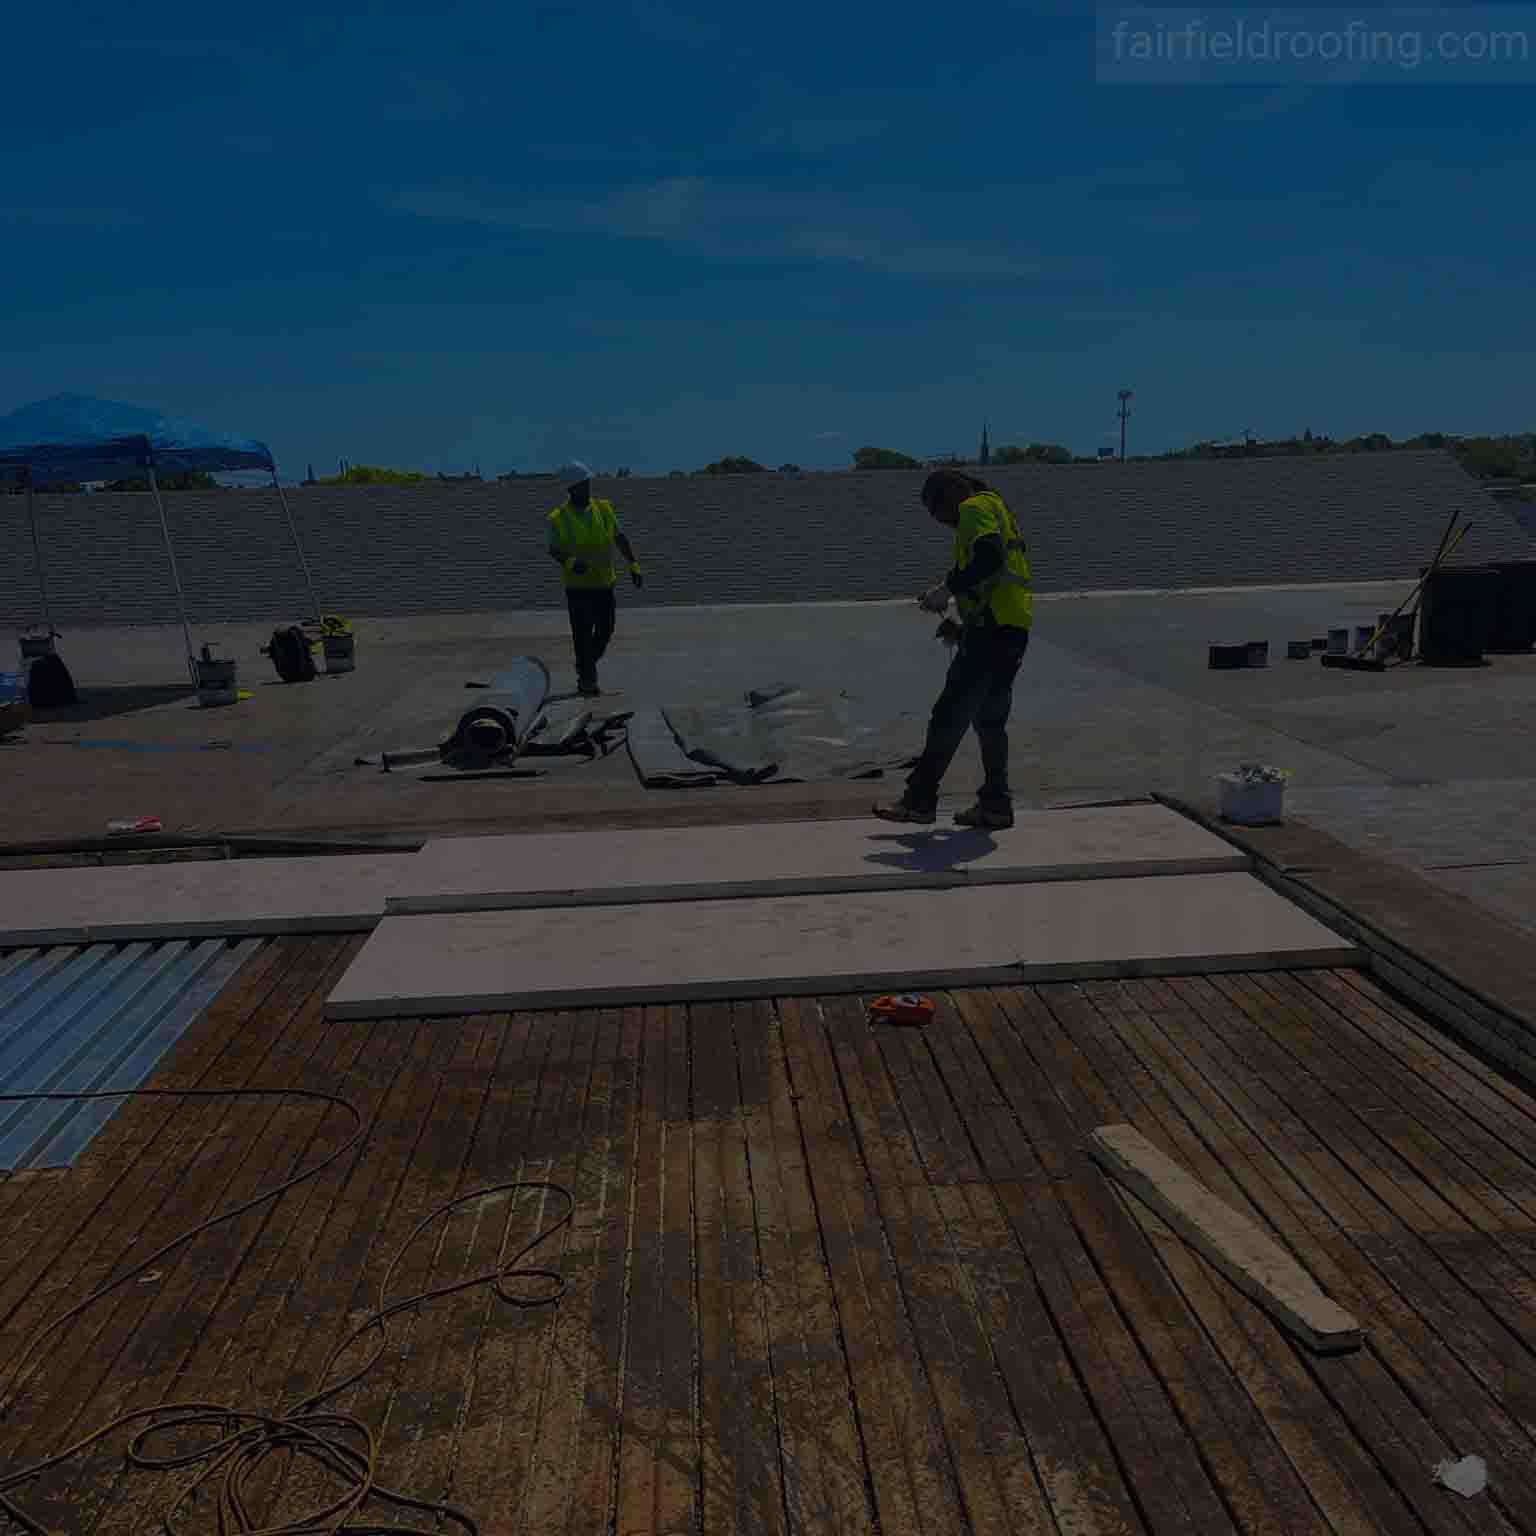 Commercial Roofing - Fairfield Roofing